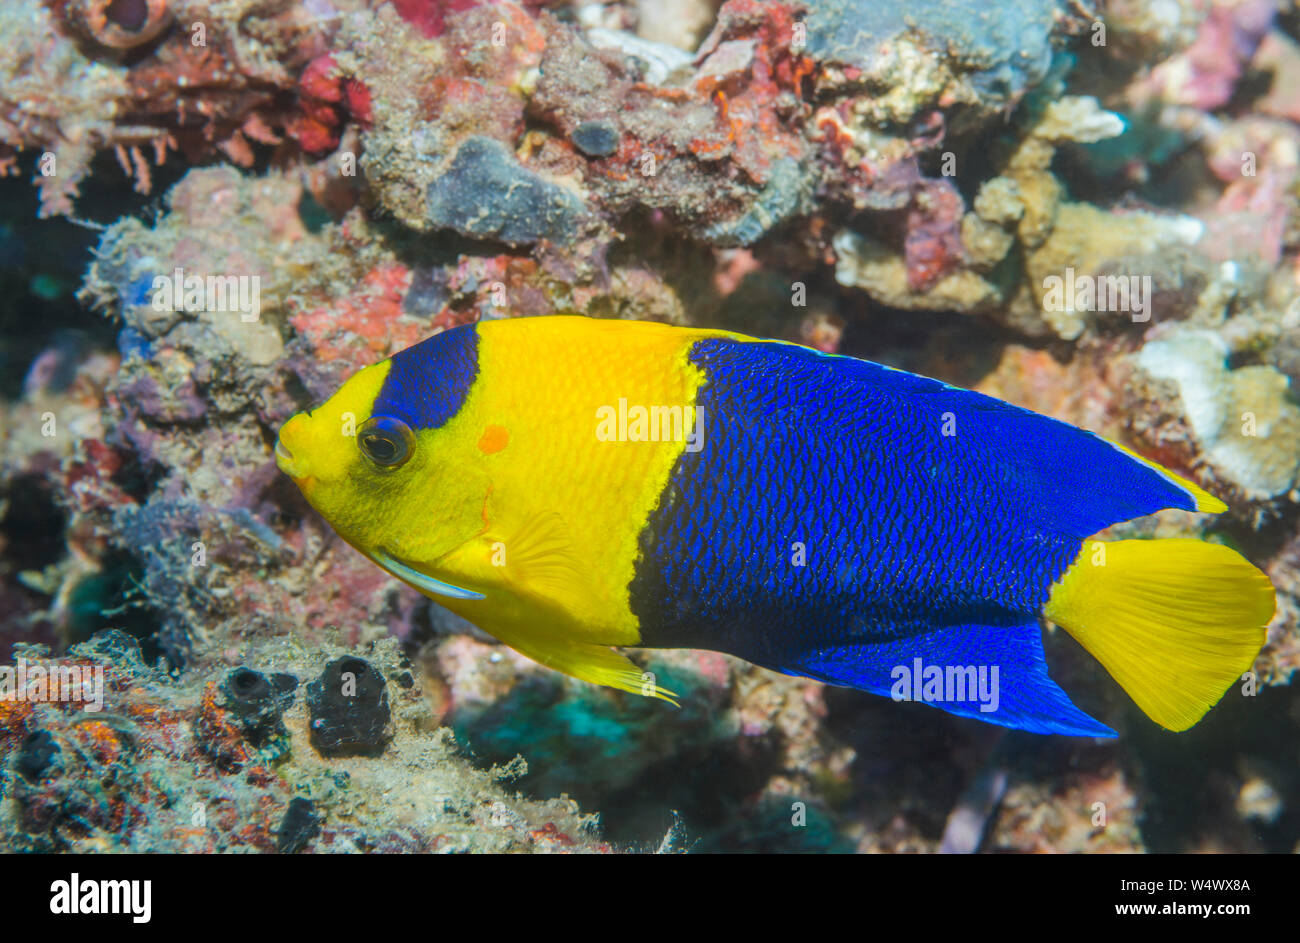 Bicolor angelfish [Centropyge bicolor].  North Sulawesi, Indonesia. Stock Photo